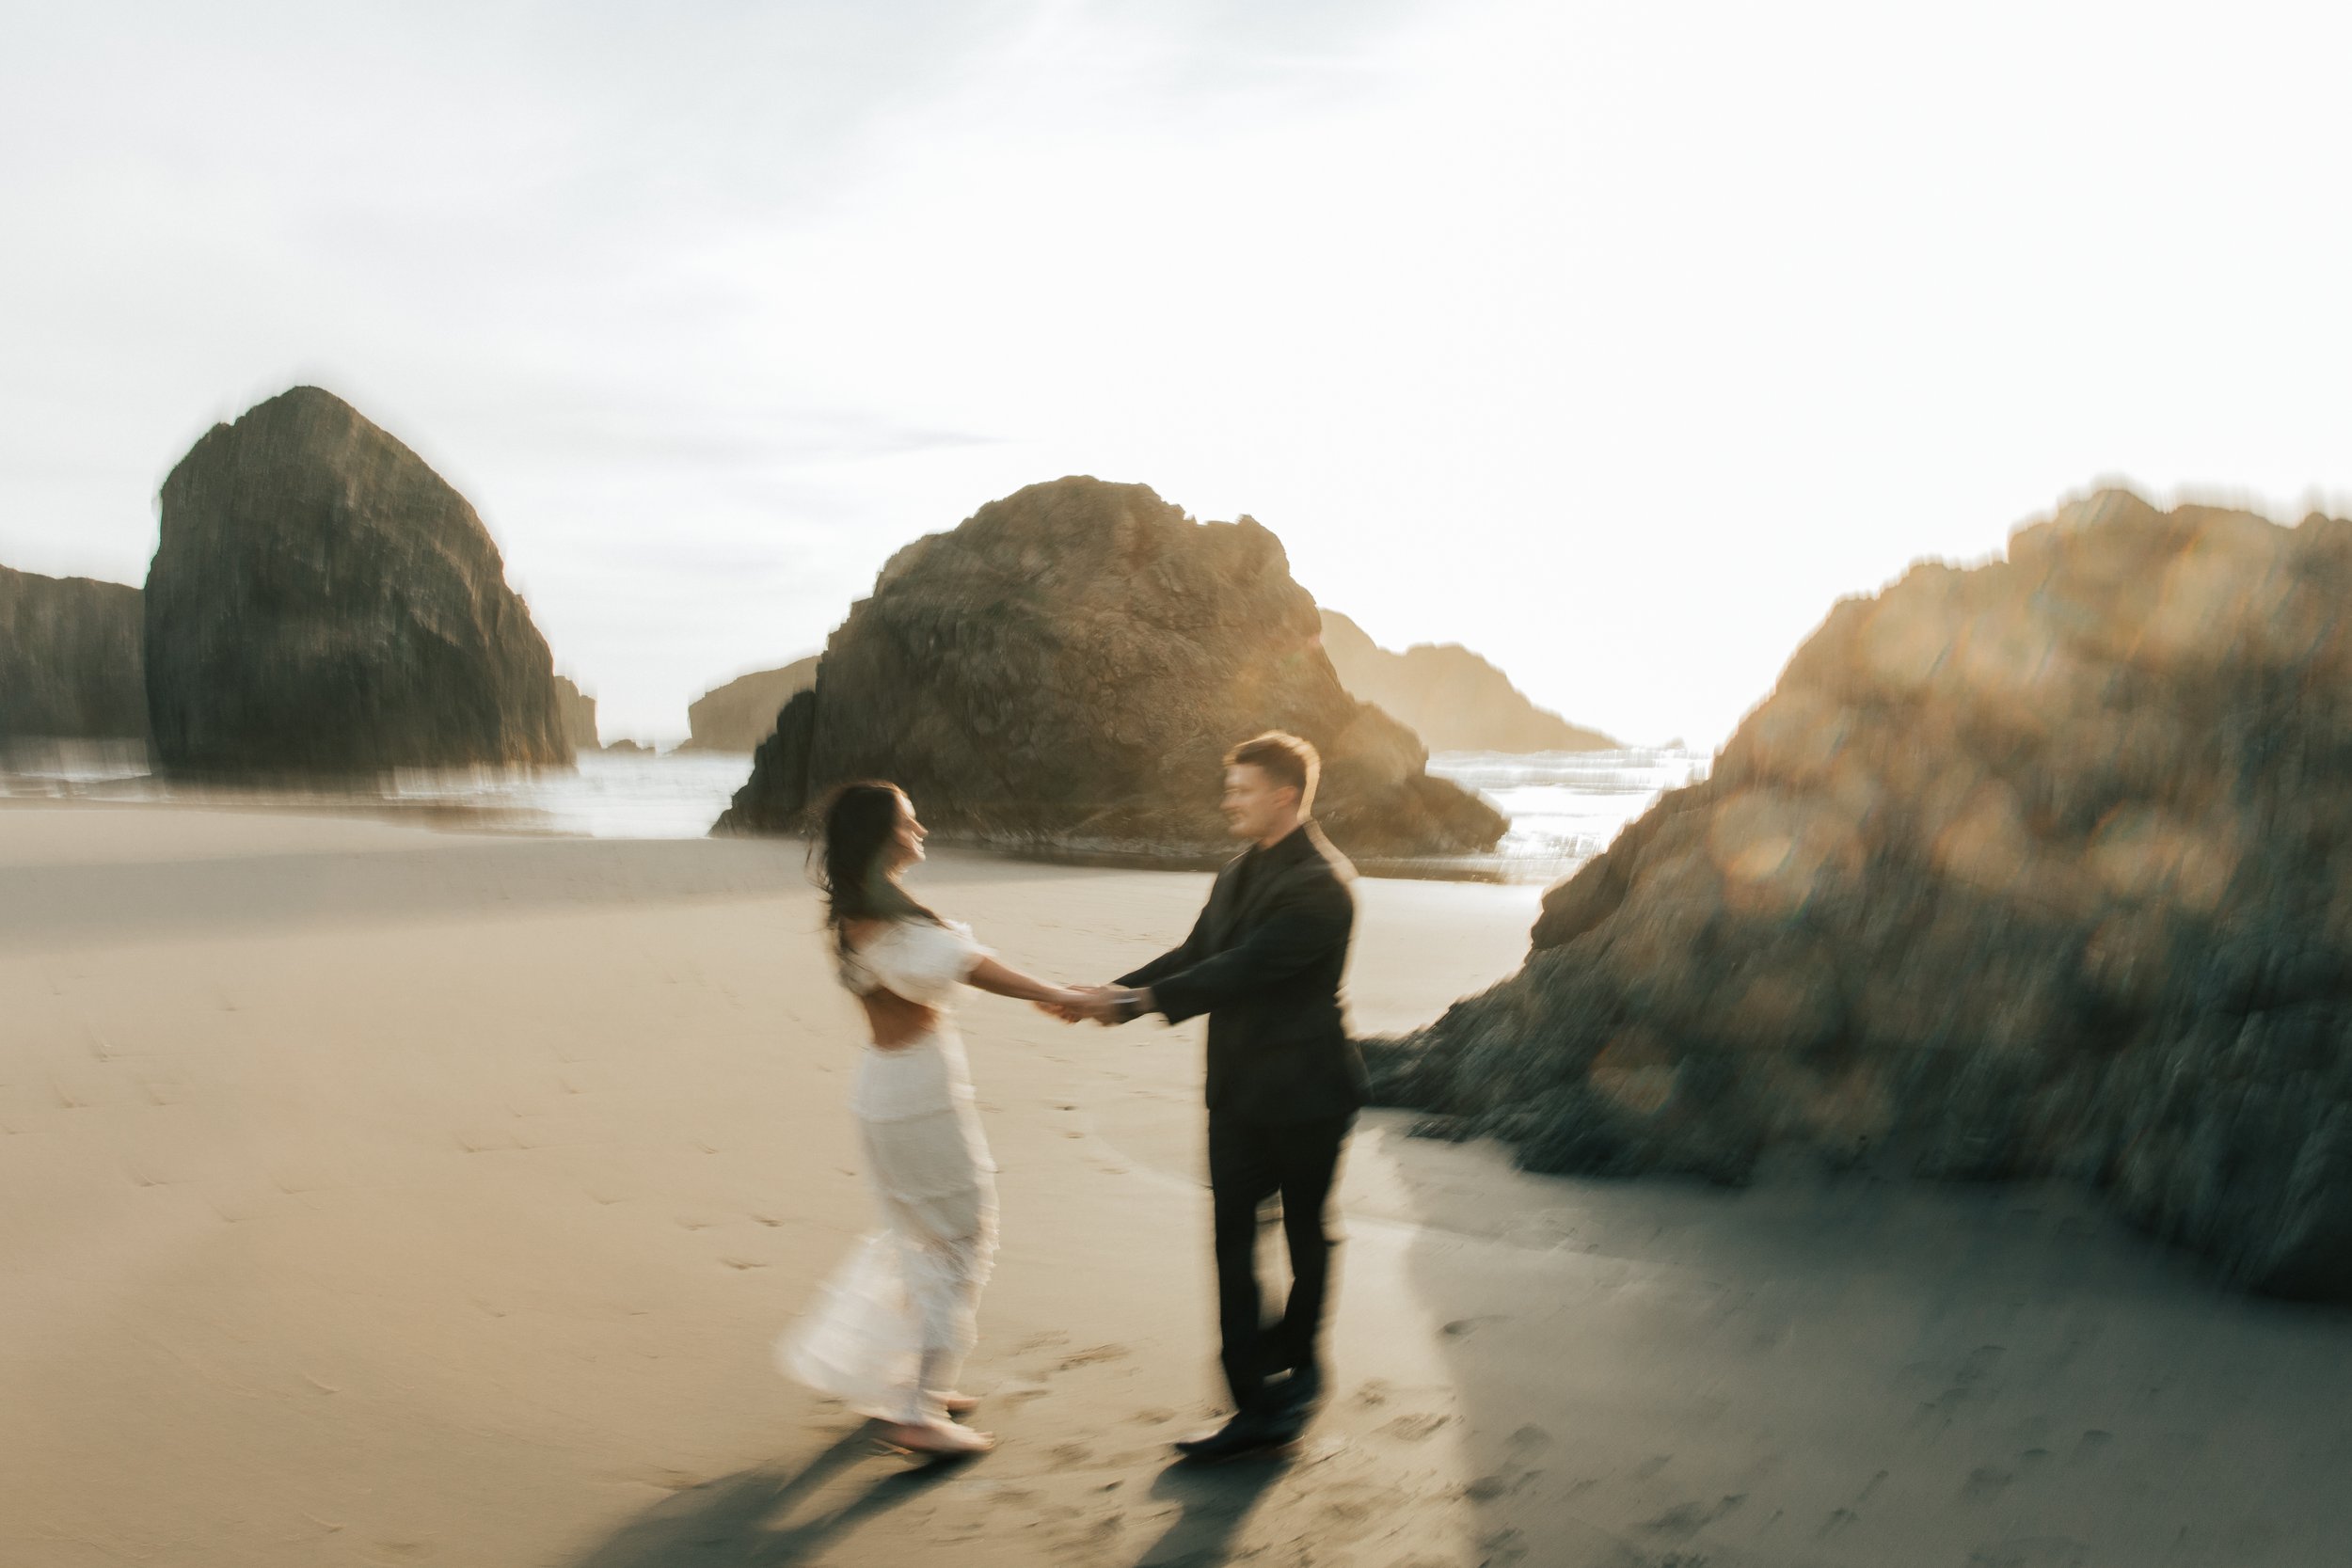  Oregon coast elopement. Couple elopes on the beach with the sun shining behind them. Sun rays behind rocks. Beach with rocks and haystacks. Southern Oregon. Brookings, Oregon. Samuel H Boardman elopement. #oregon #photographer #elopement 